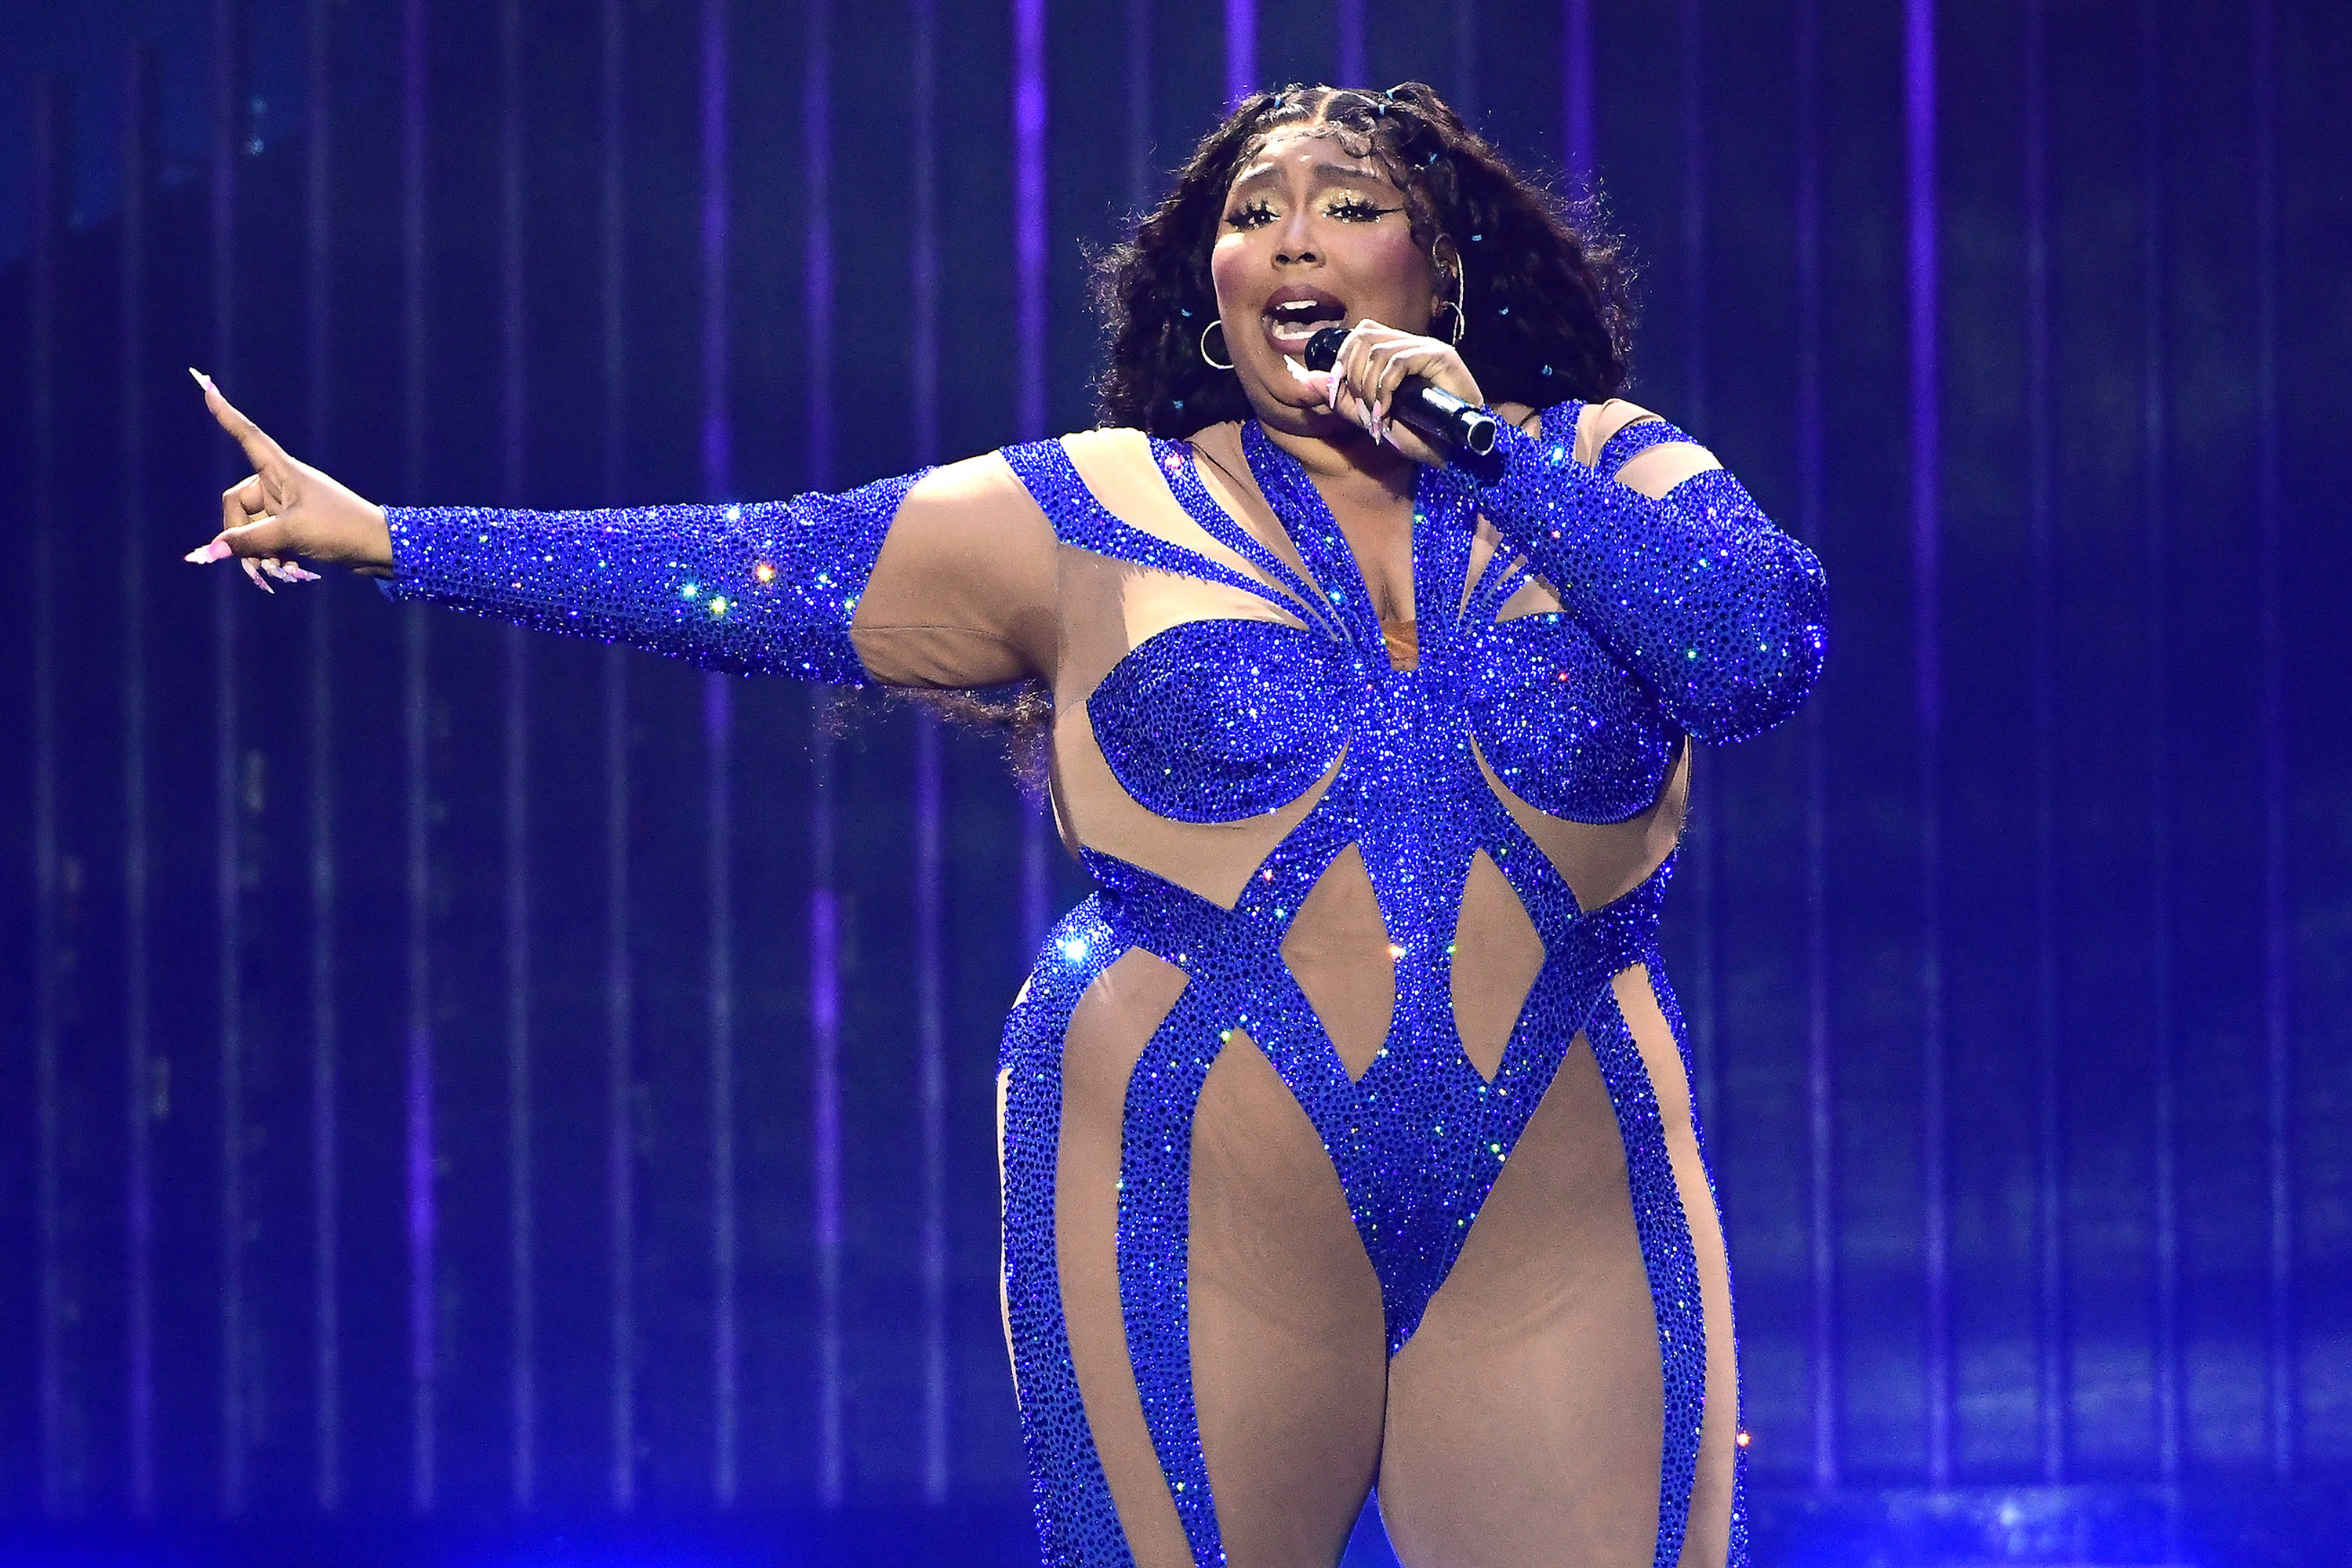 Lizzo Meets Her New Wax Figure: 'A Twosome with Lizzo